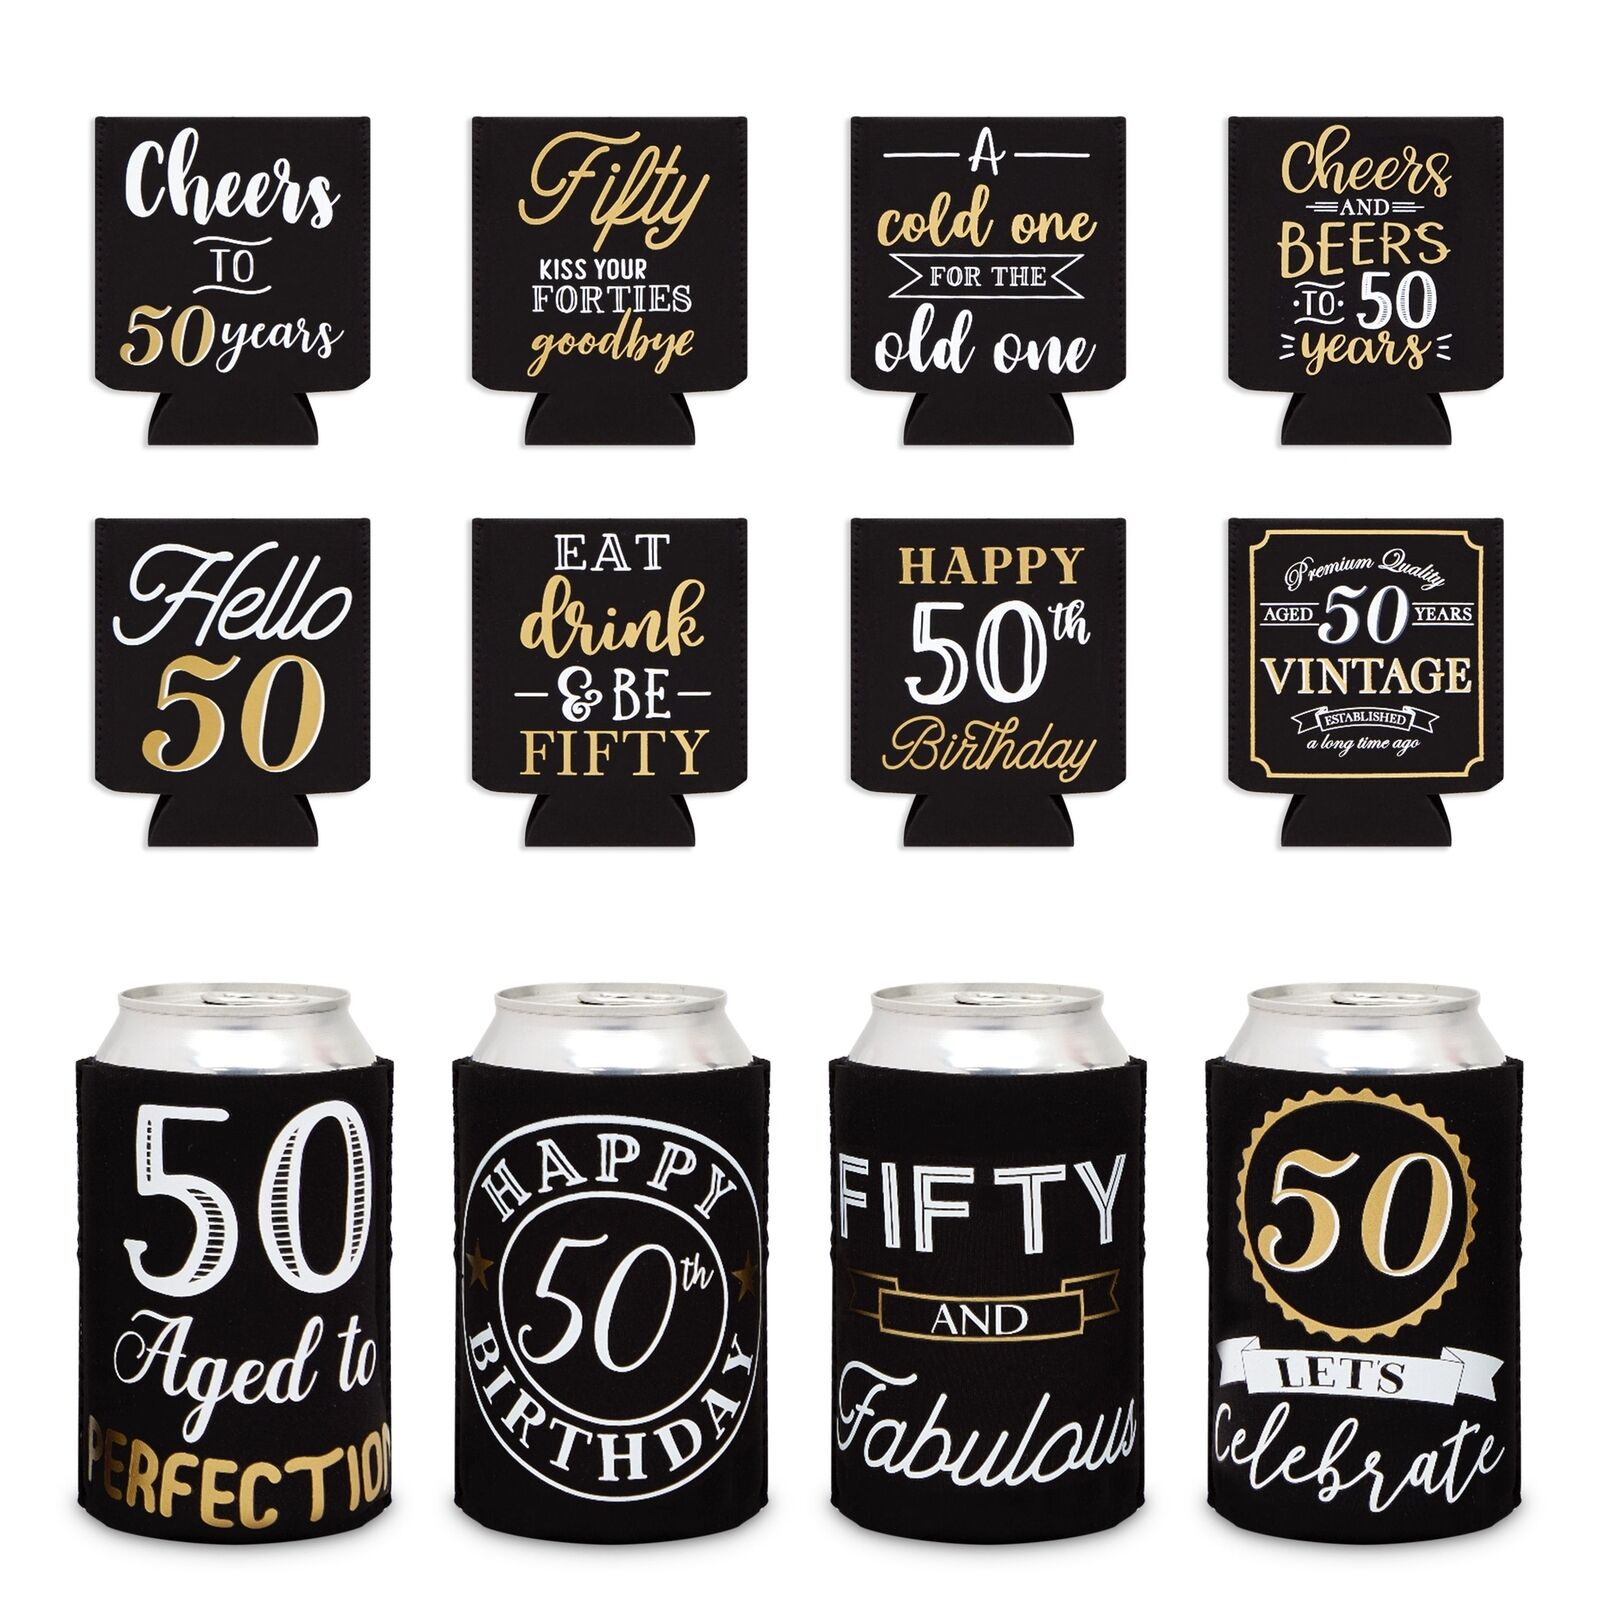 12 Pack 50th Birthday Can Cooler Sleeves for Soda, Beer, Decor and Party Favors